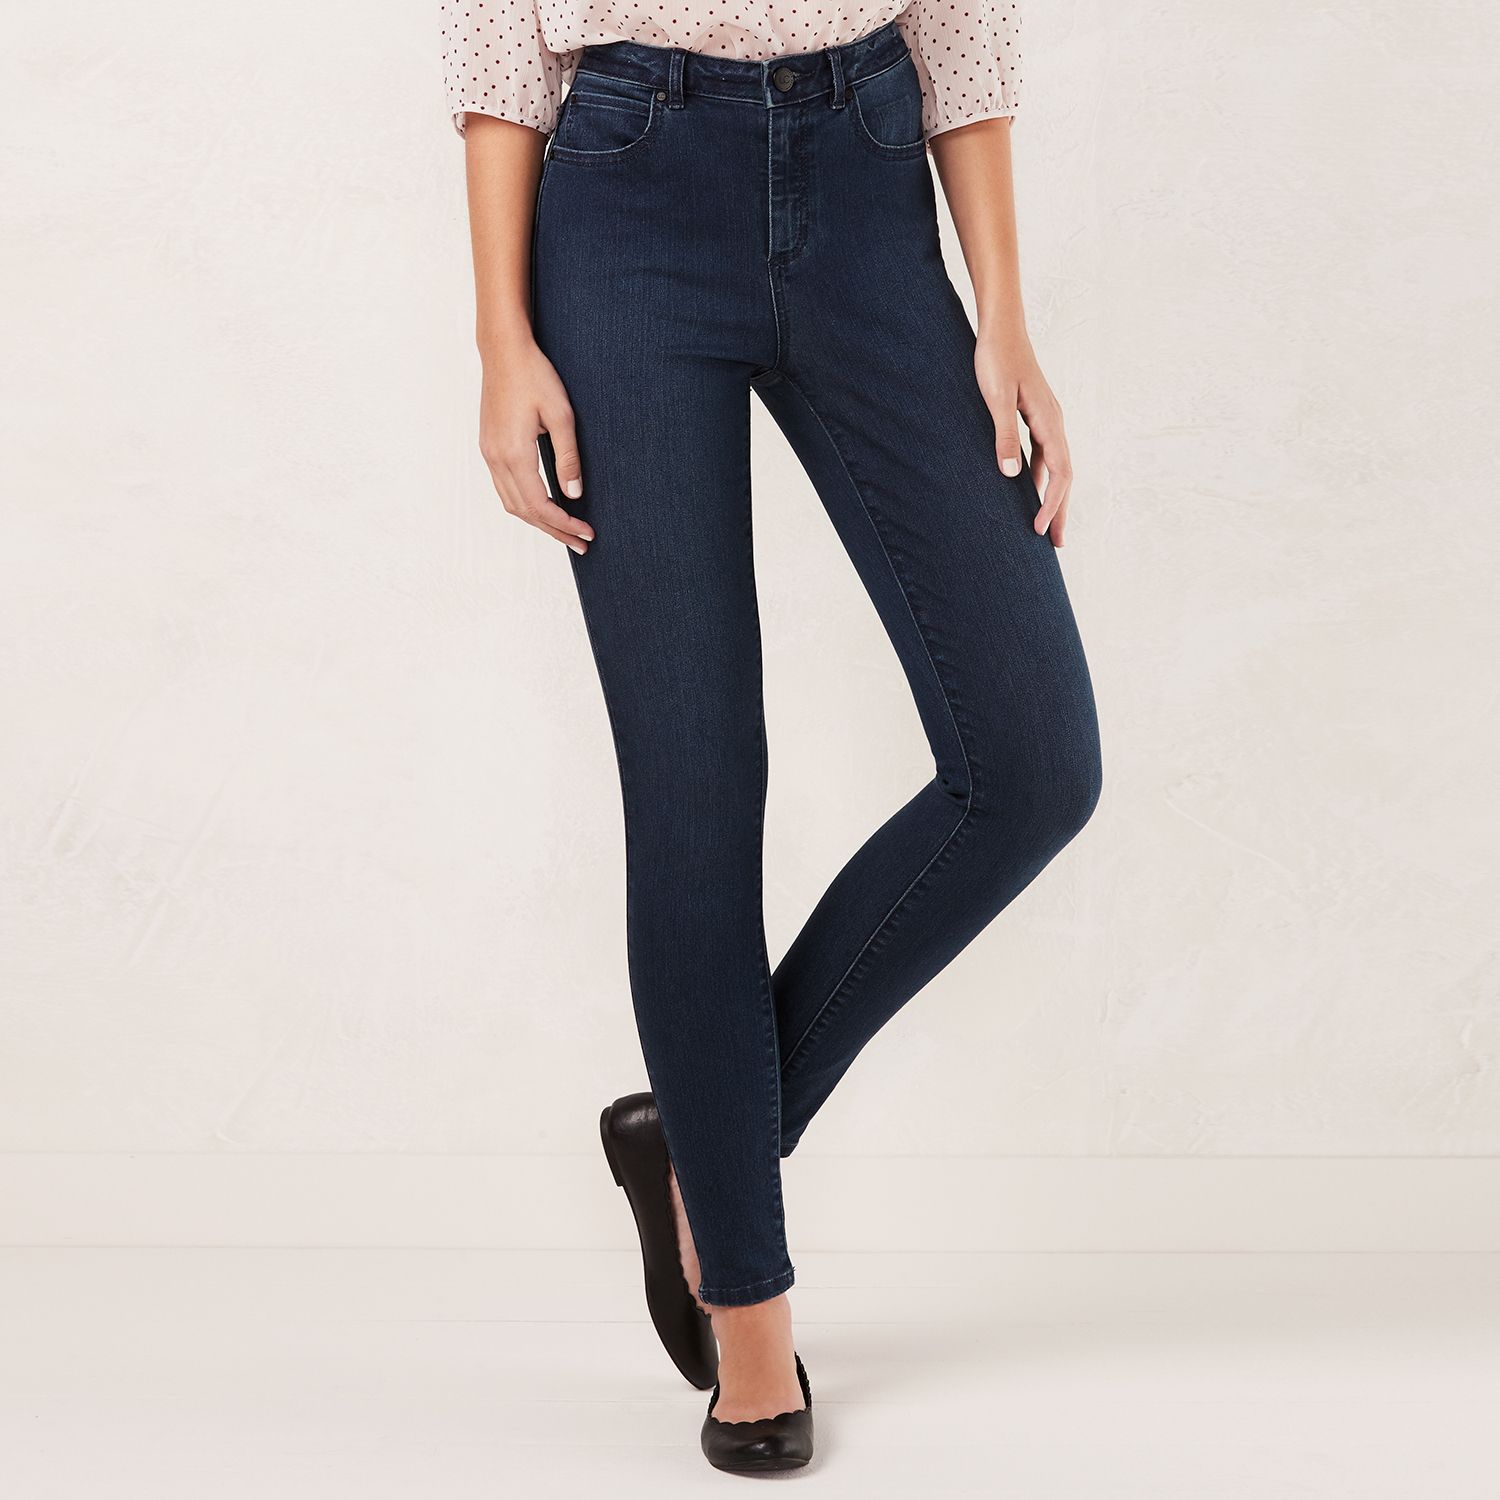 h&m mama shaping skinny jeans